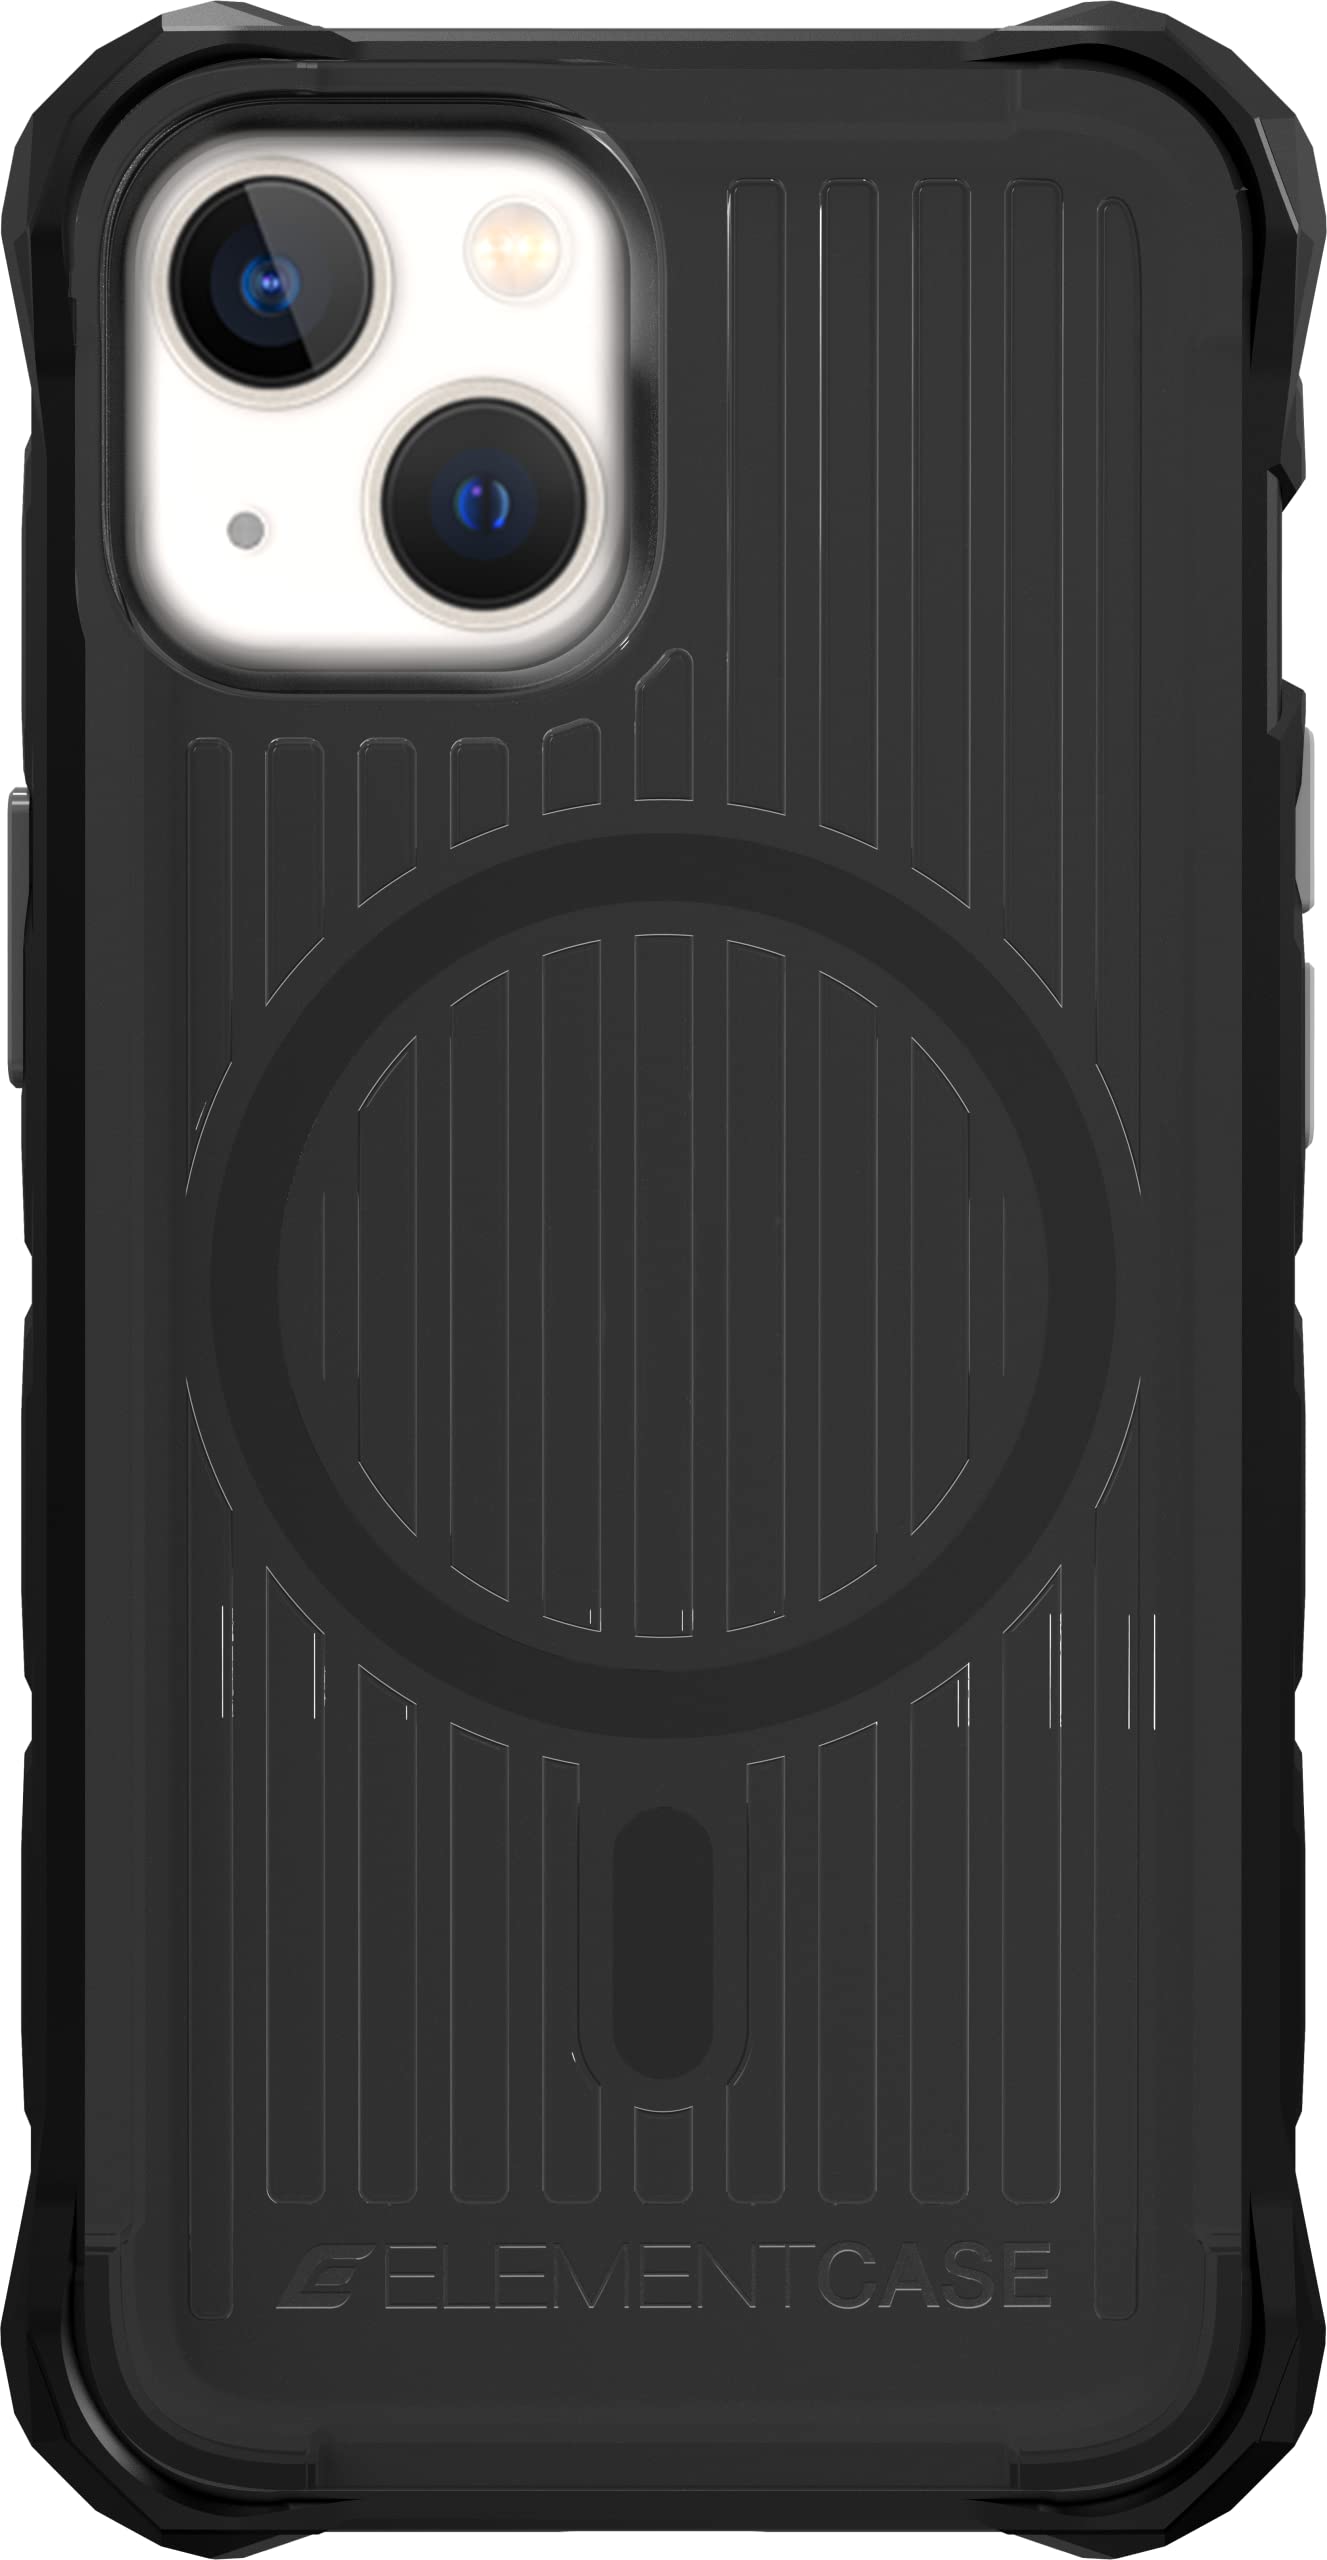 Element Case Special Ops for iPhone 13 Pro - MagSafe Compatible, Rugged, Lightweight, and Mil-Spec Drop Tested iPhone 13 Pro Case - Smoke/Black (EMT-322-251FU-01)